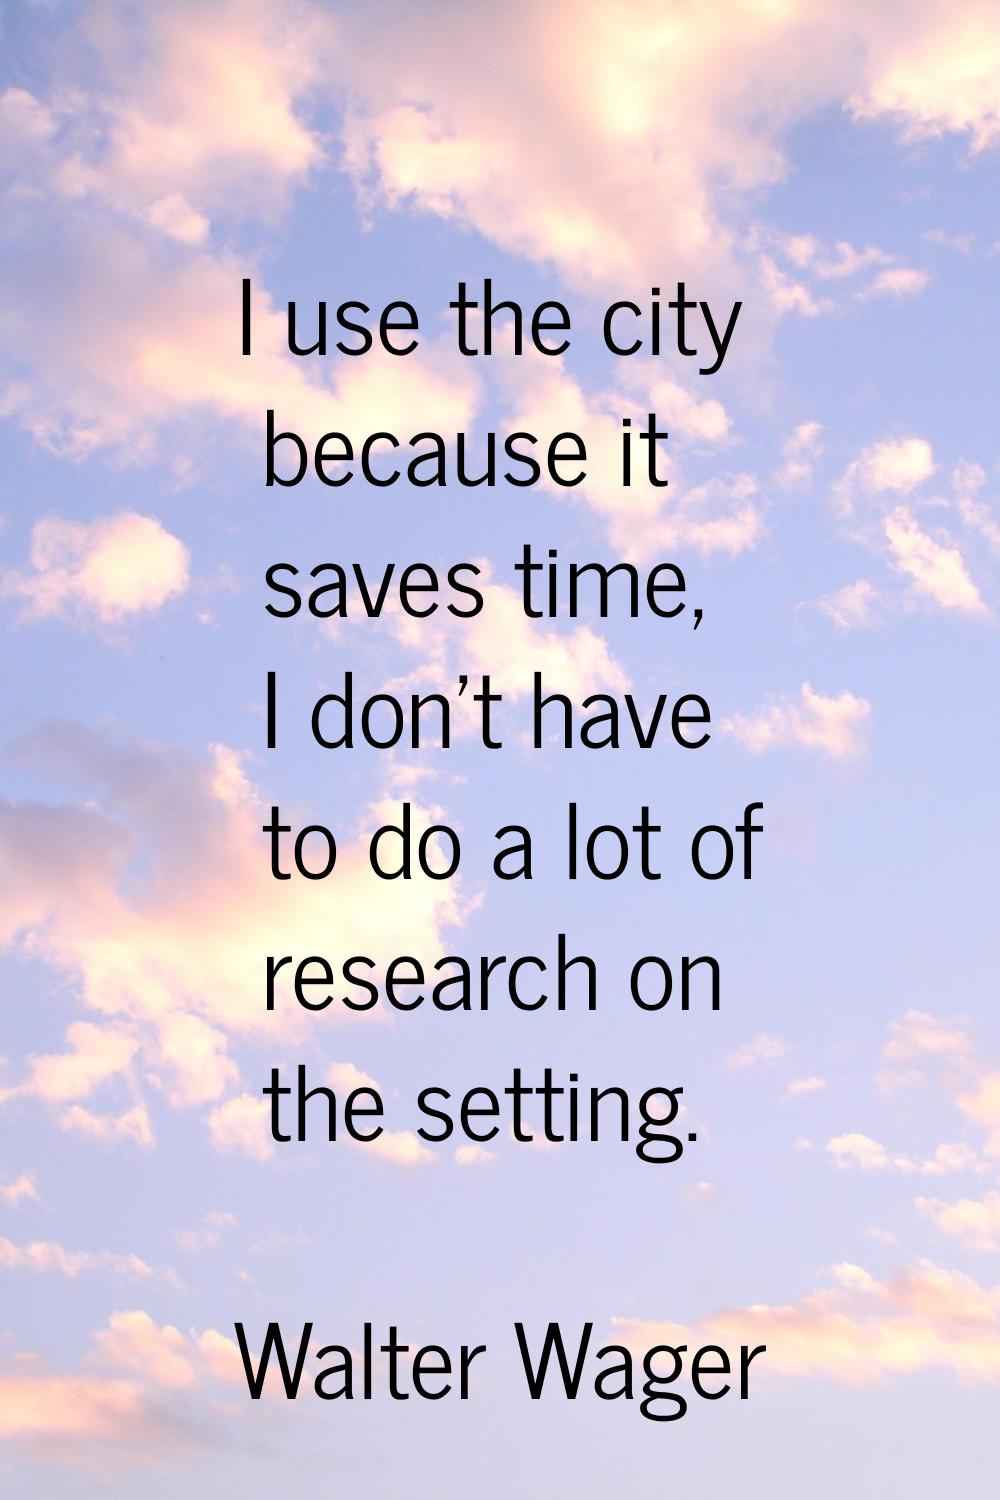 I use the city because it saves time, I don't have to do a lot of research on the setting.